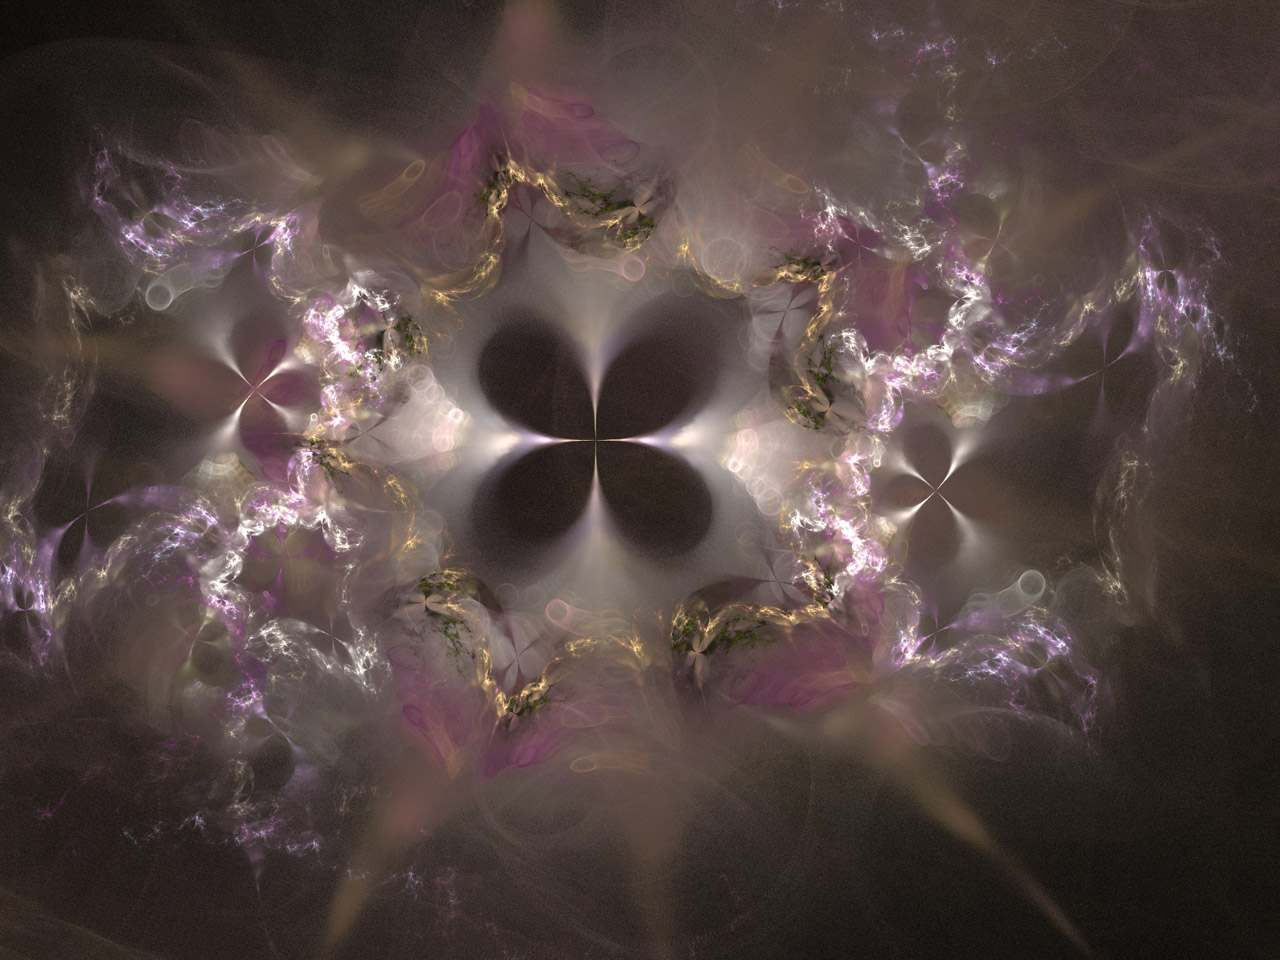 Black four leaf clover image in with pinks and light brown fractal